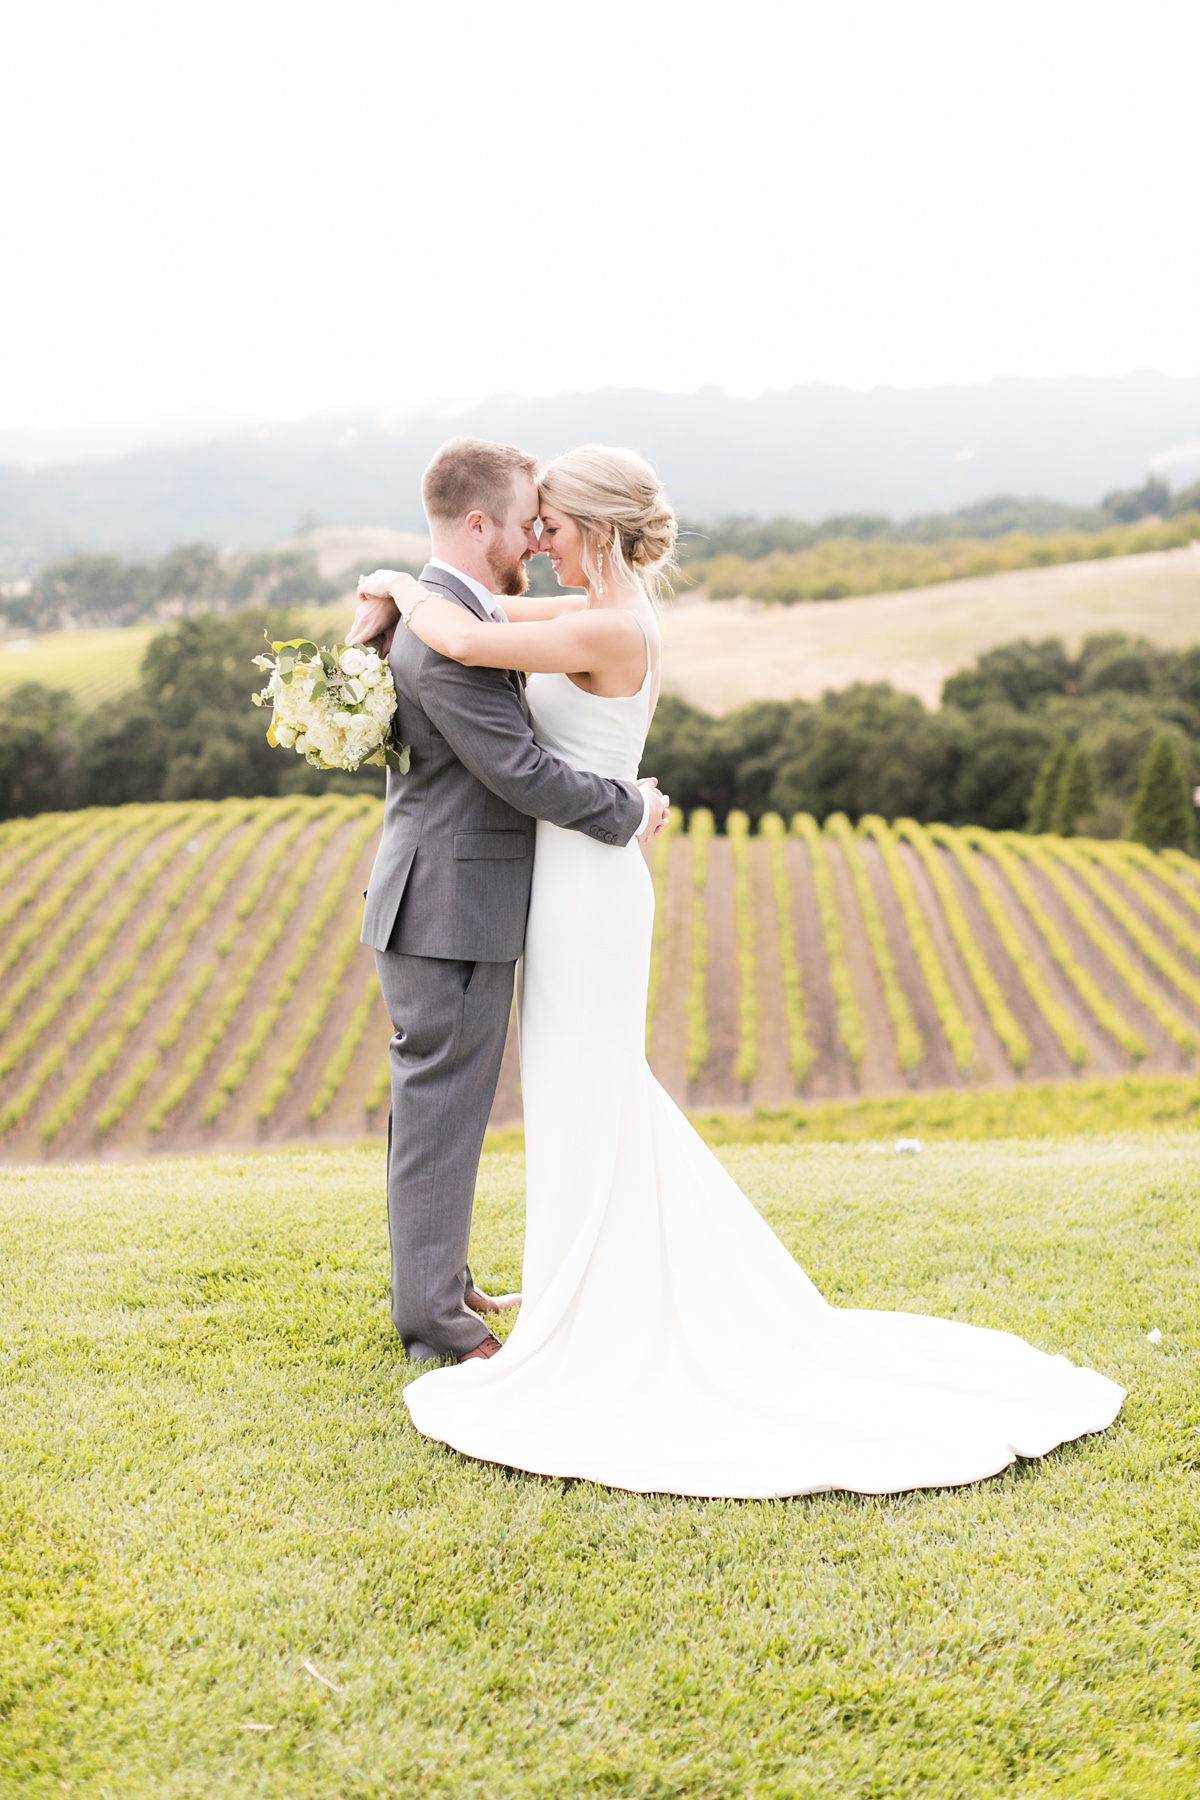 Bride and groom embrace at hilltop winery wedding in paso robles california